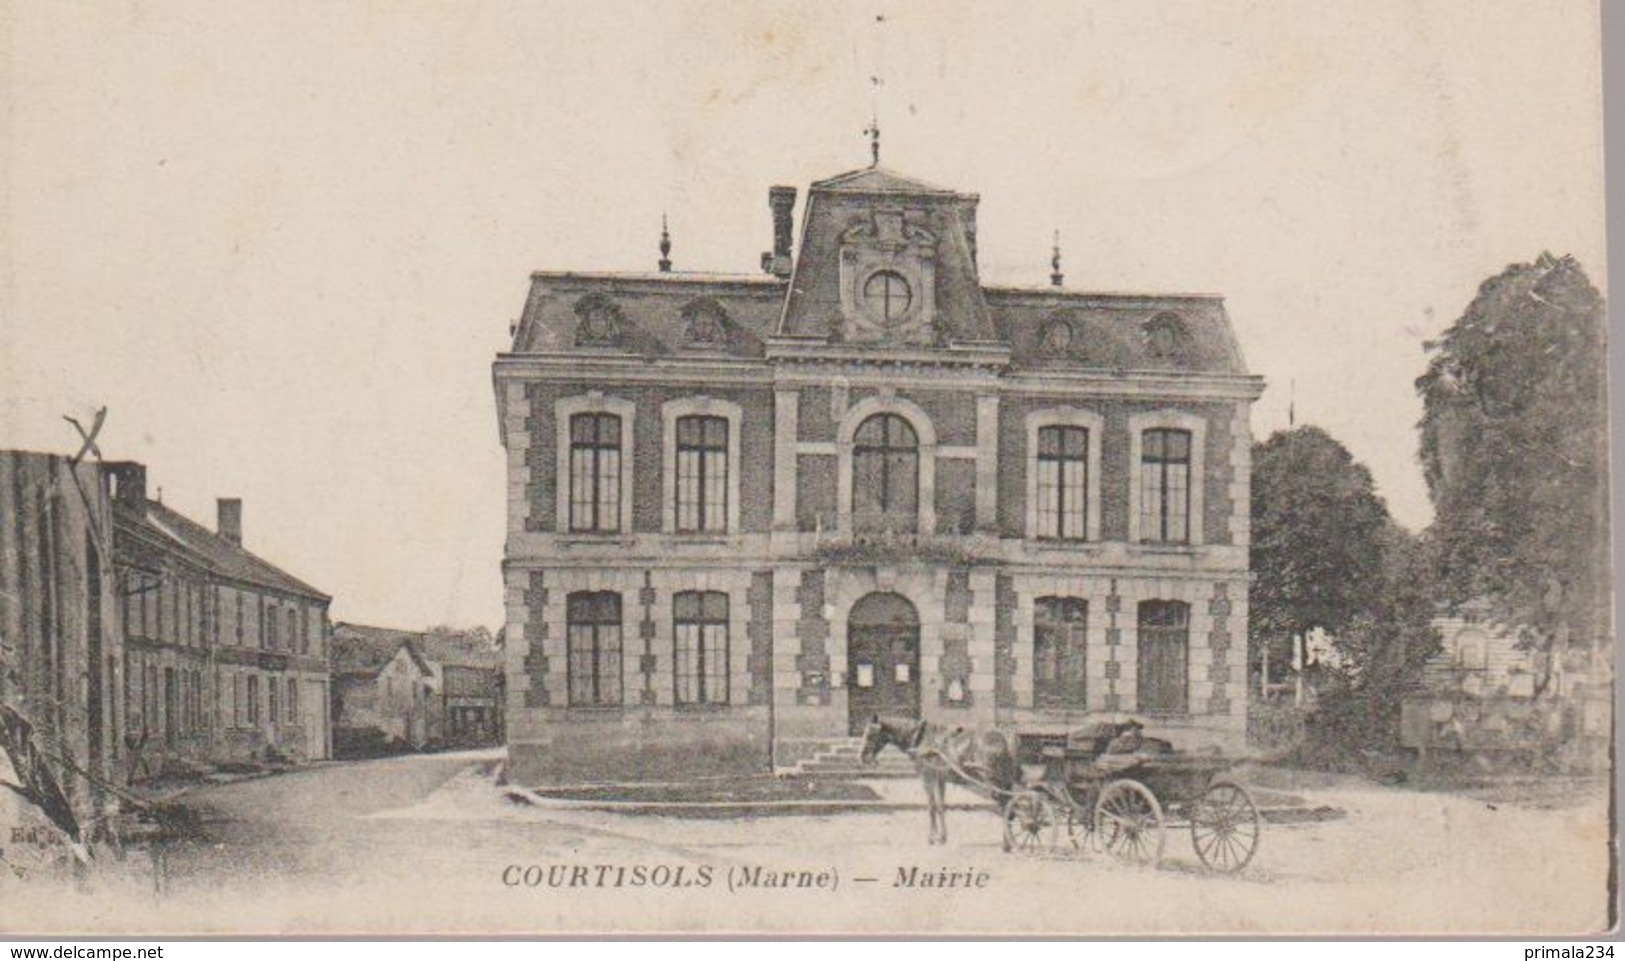 COURTISOLS - MAIRIE - Courtisols